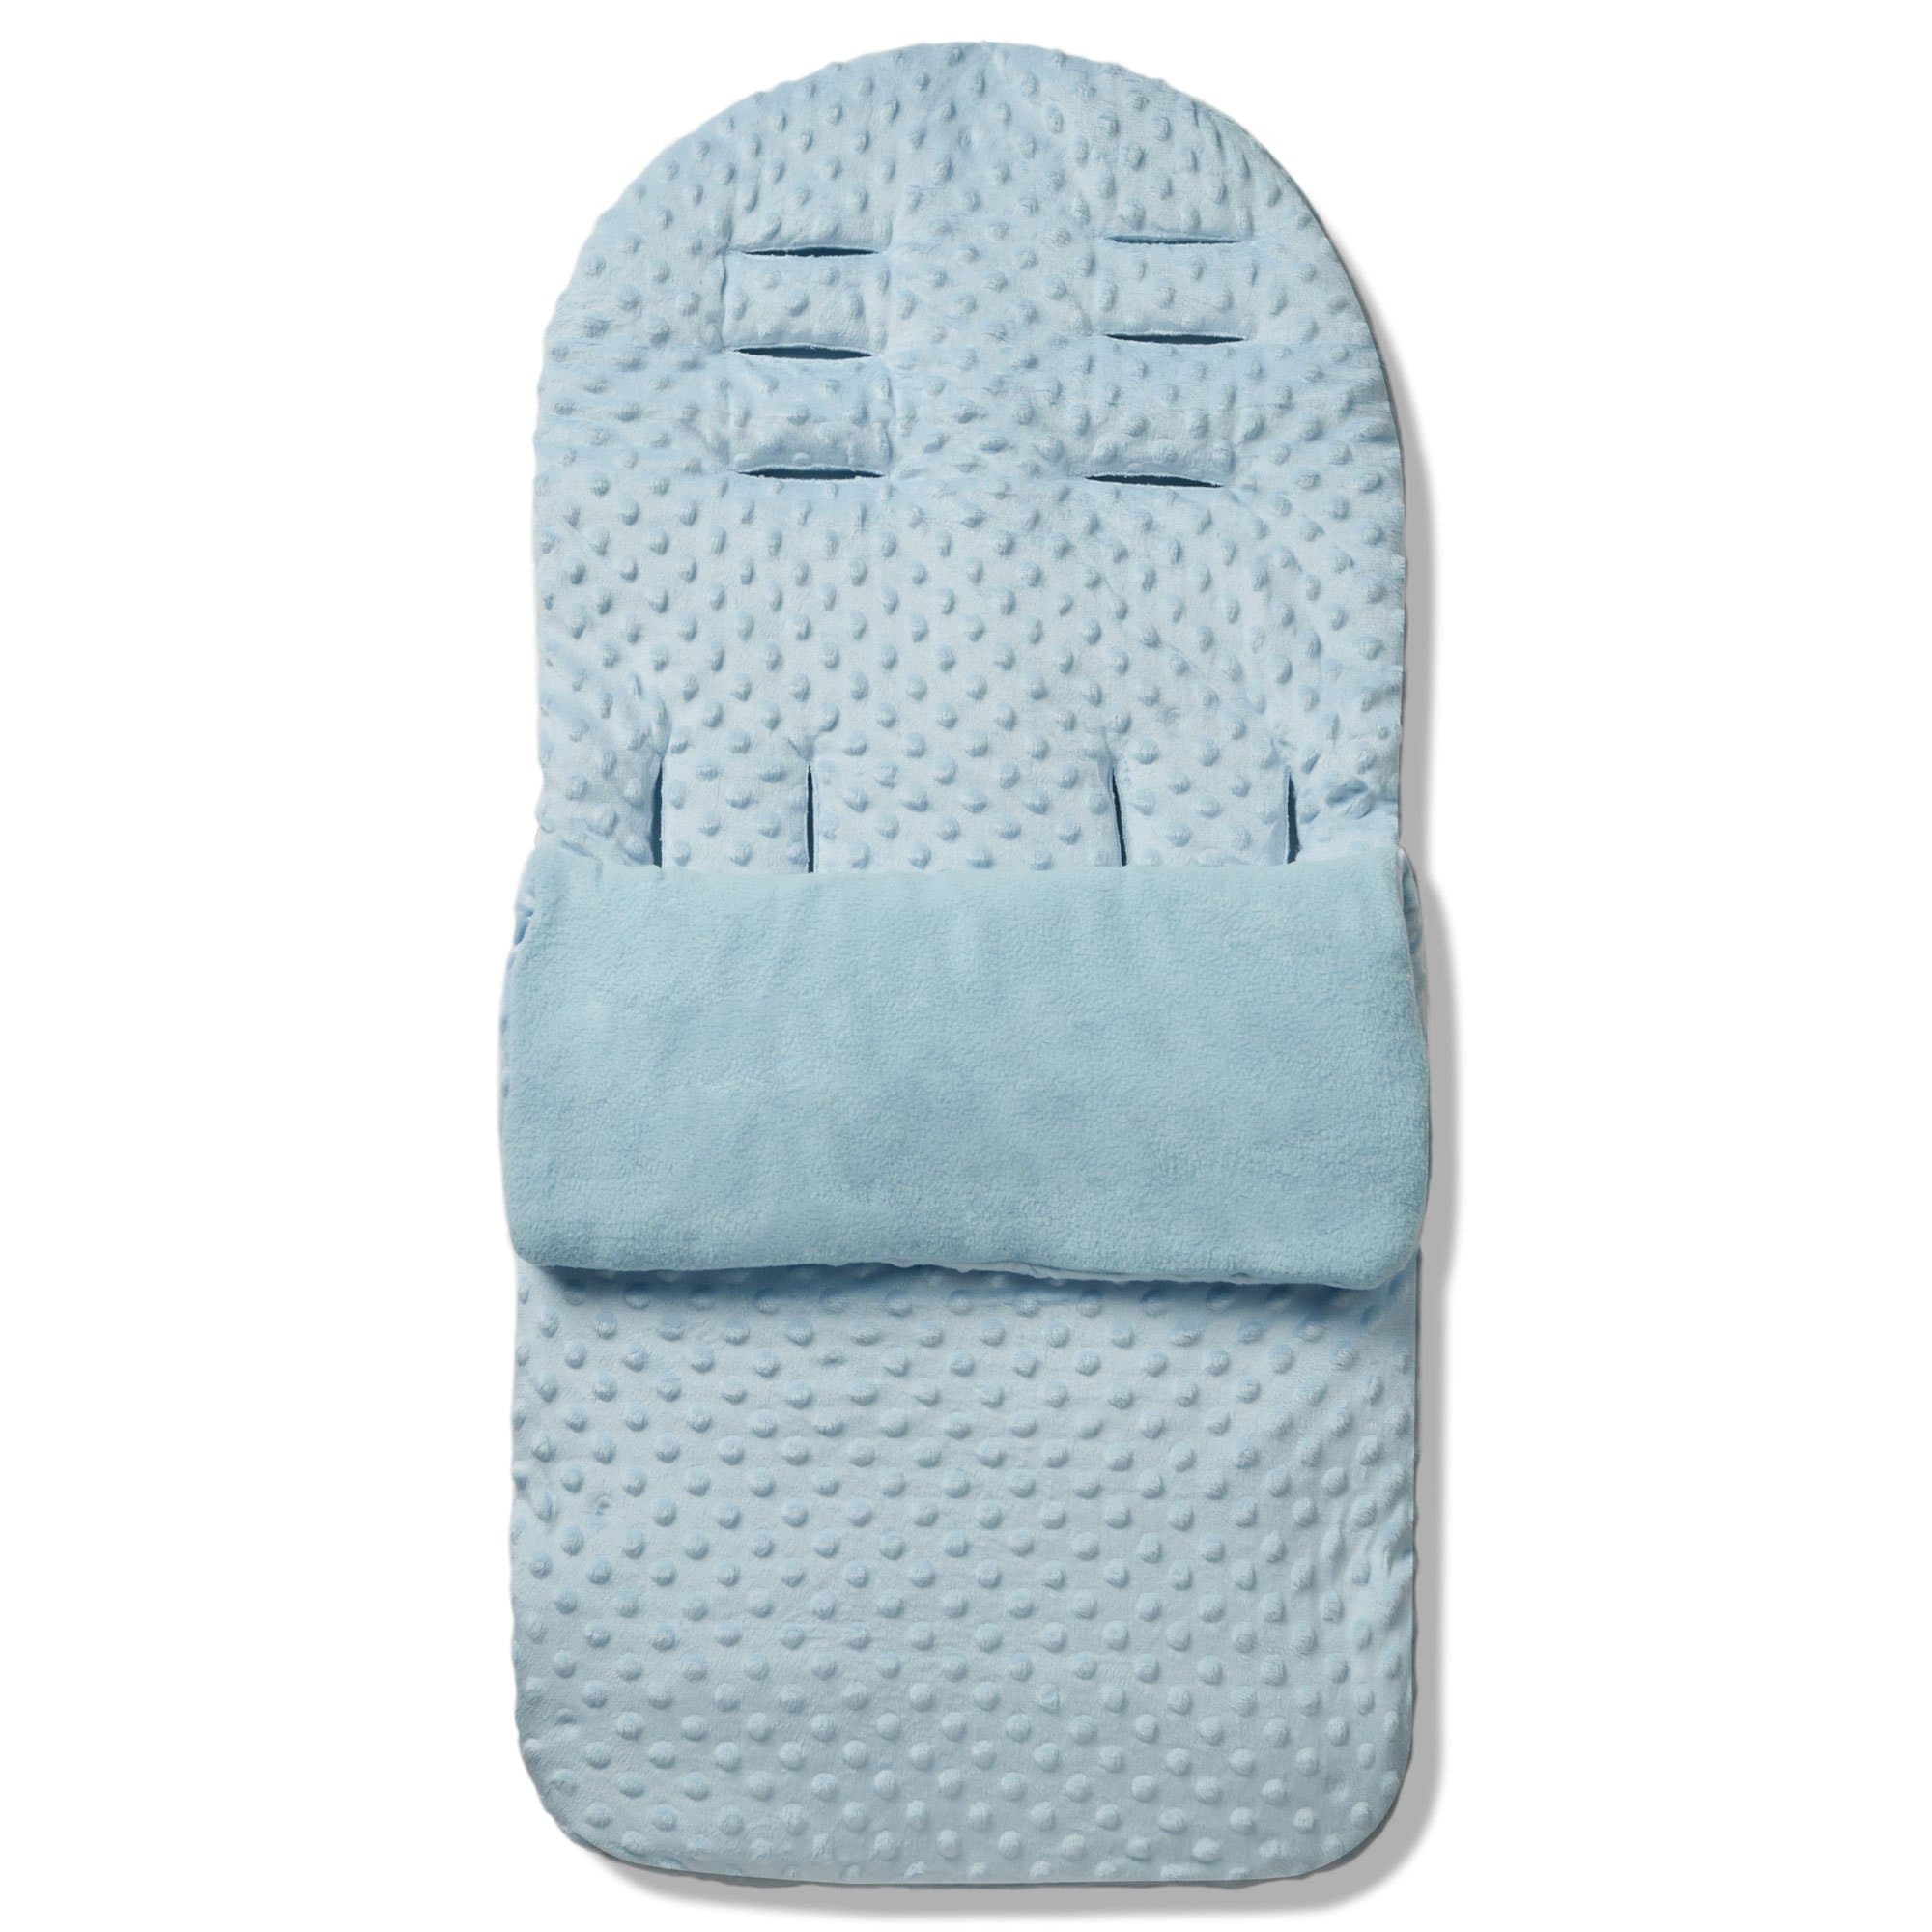 Dimple Footmuff / Cosy Toes Compatible with Stokke - Blue / Fits All Models | For Your Little One